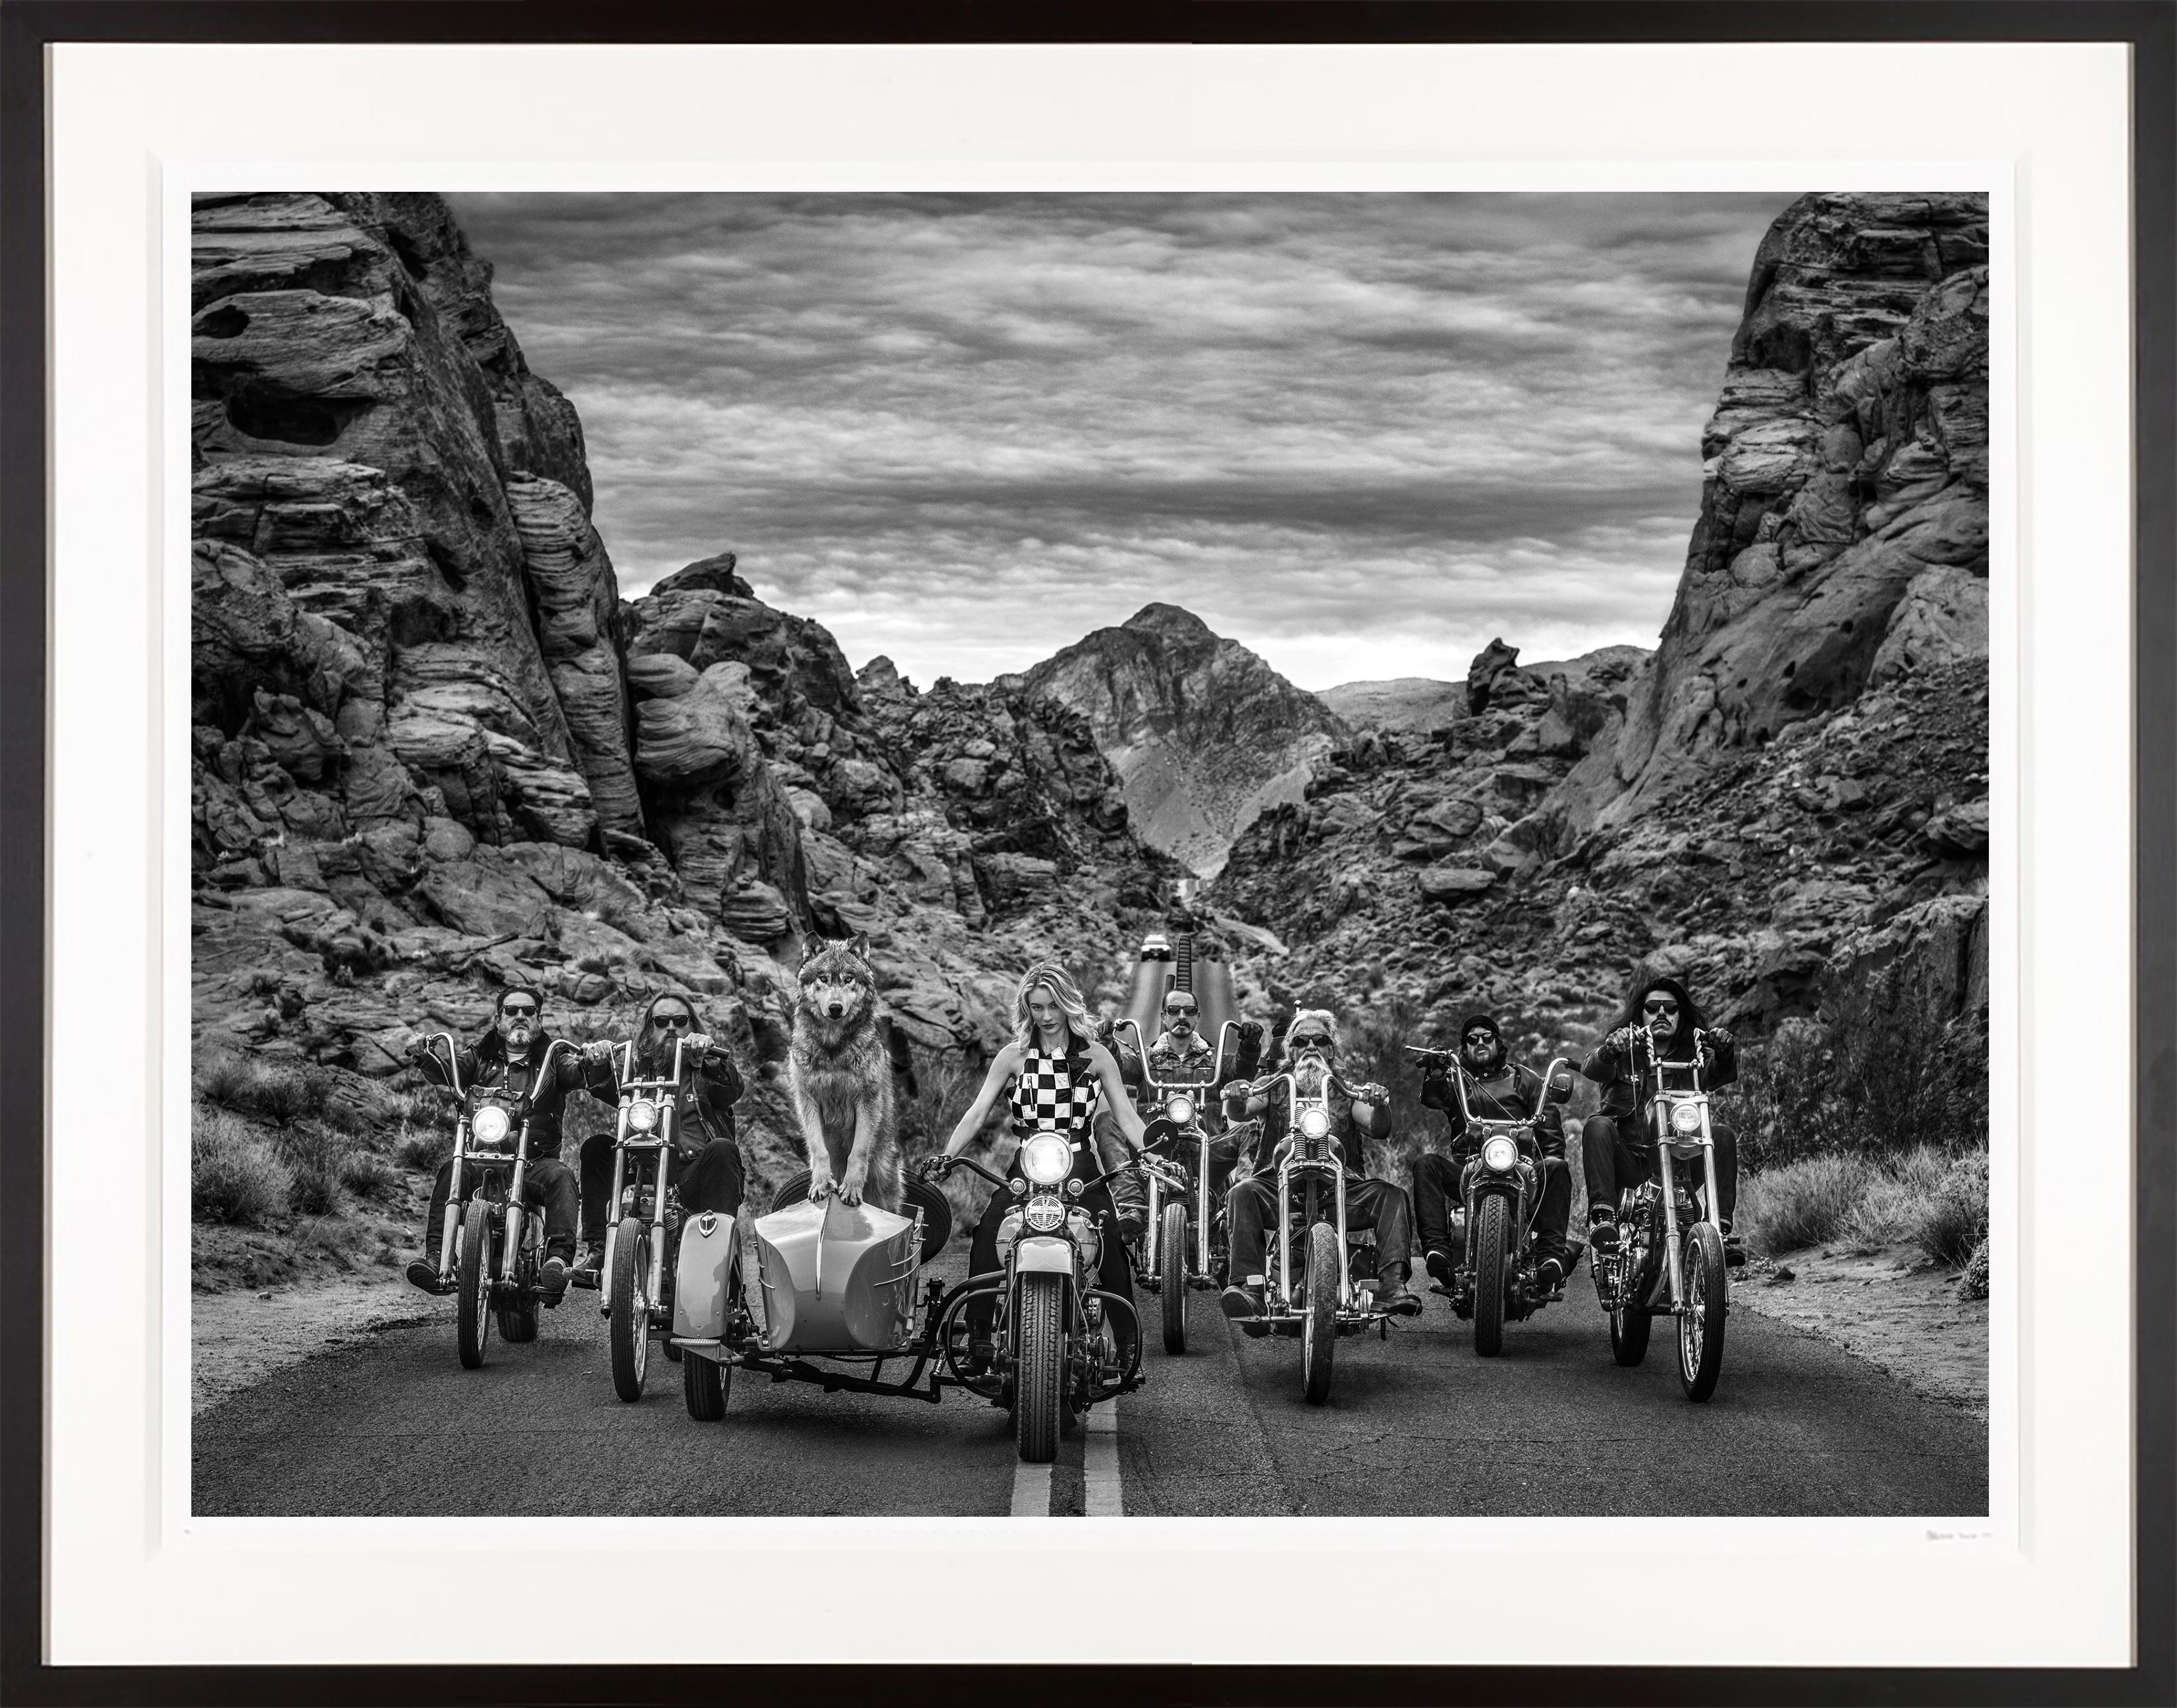 This work is sourced directly from the artist.
Framed Digital Pigment Print on Archival 315gsm Hahnemuhle Photo Rag Baryta Paper
Hand-signed by artist with Certificate of Authenticity

The Harley-Davidson is a heavyweight brand - like Coke and